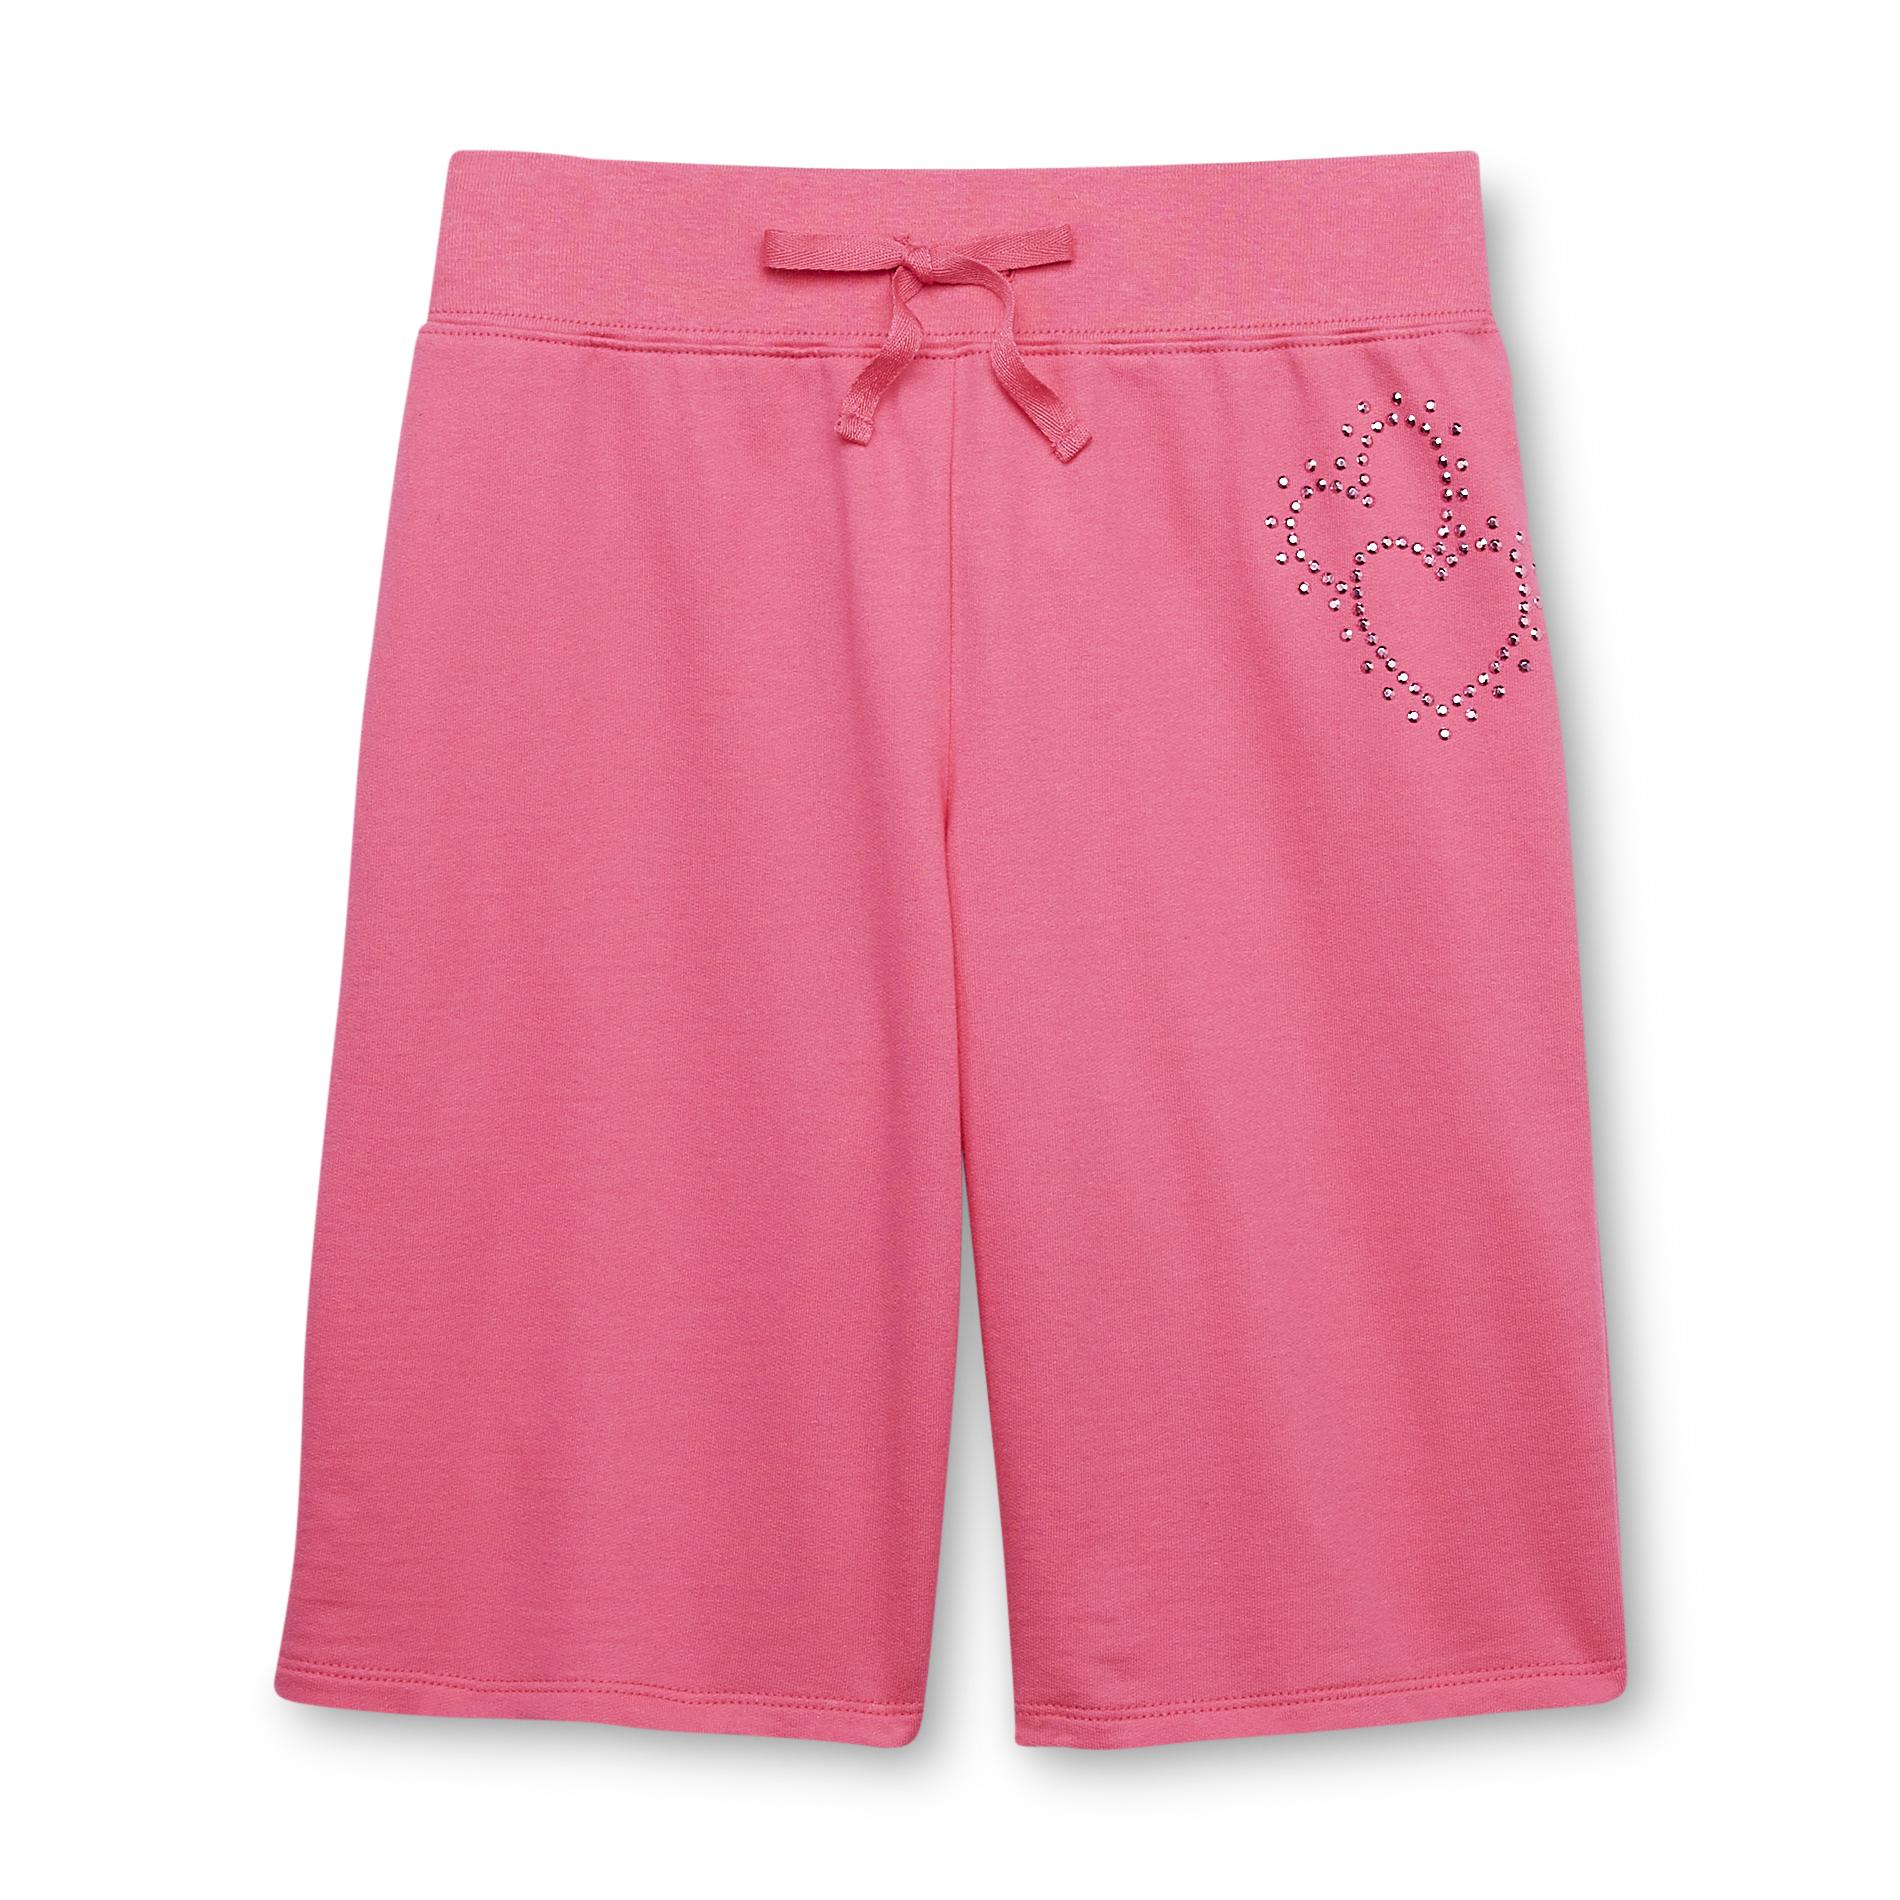 Canyon River Blues Girl's French Terry Bermuda Shorts - Butterfly